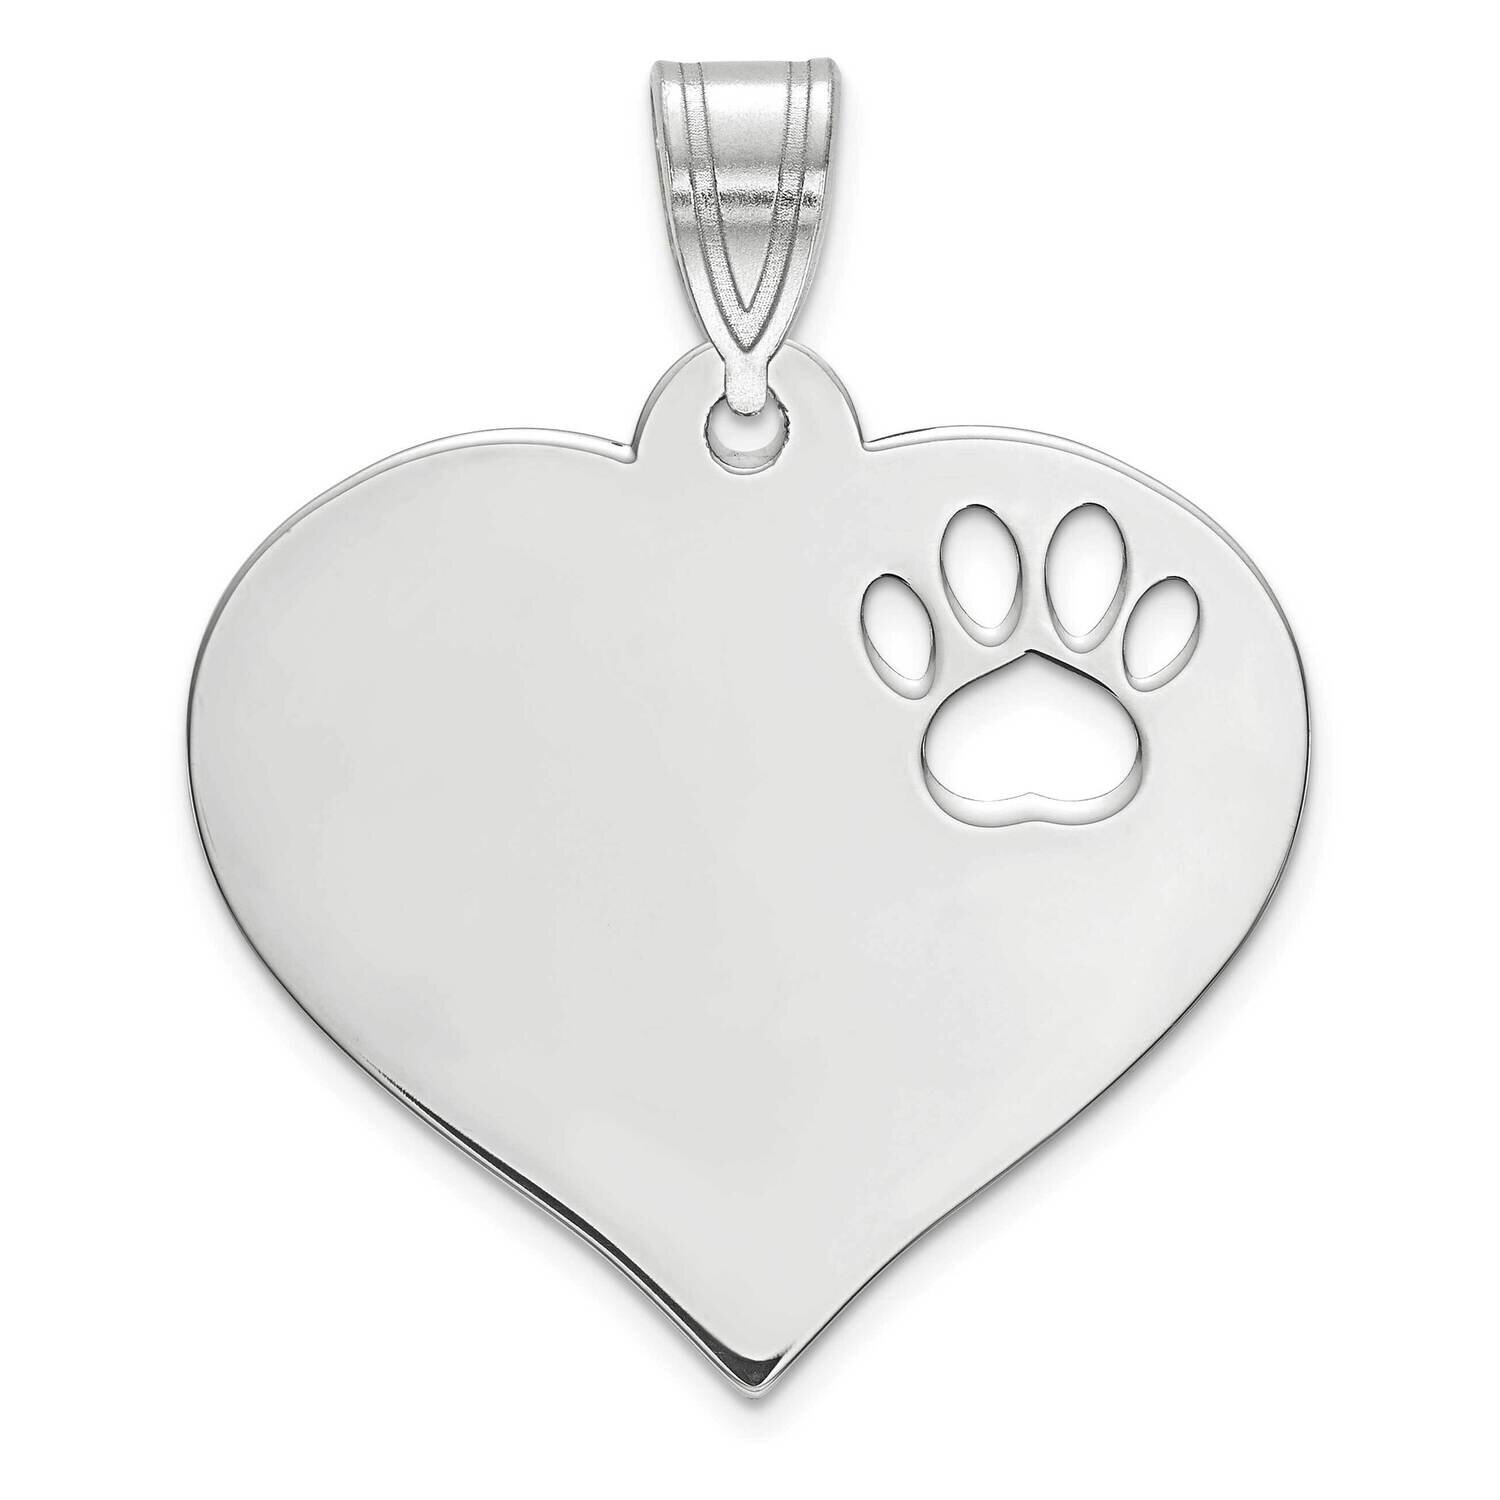 Heart Pendant with Pawprint Cutout Sterling Silver Rhodium-plated XNA768SS